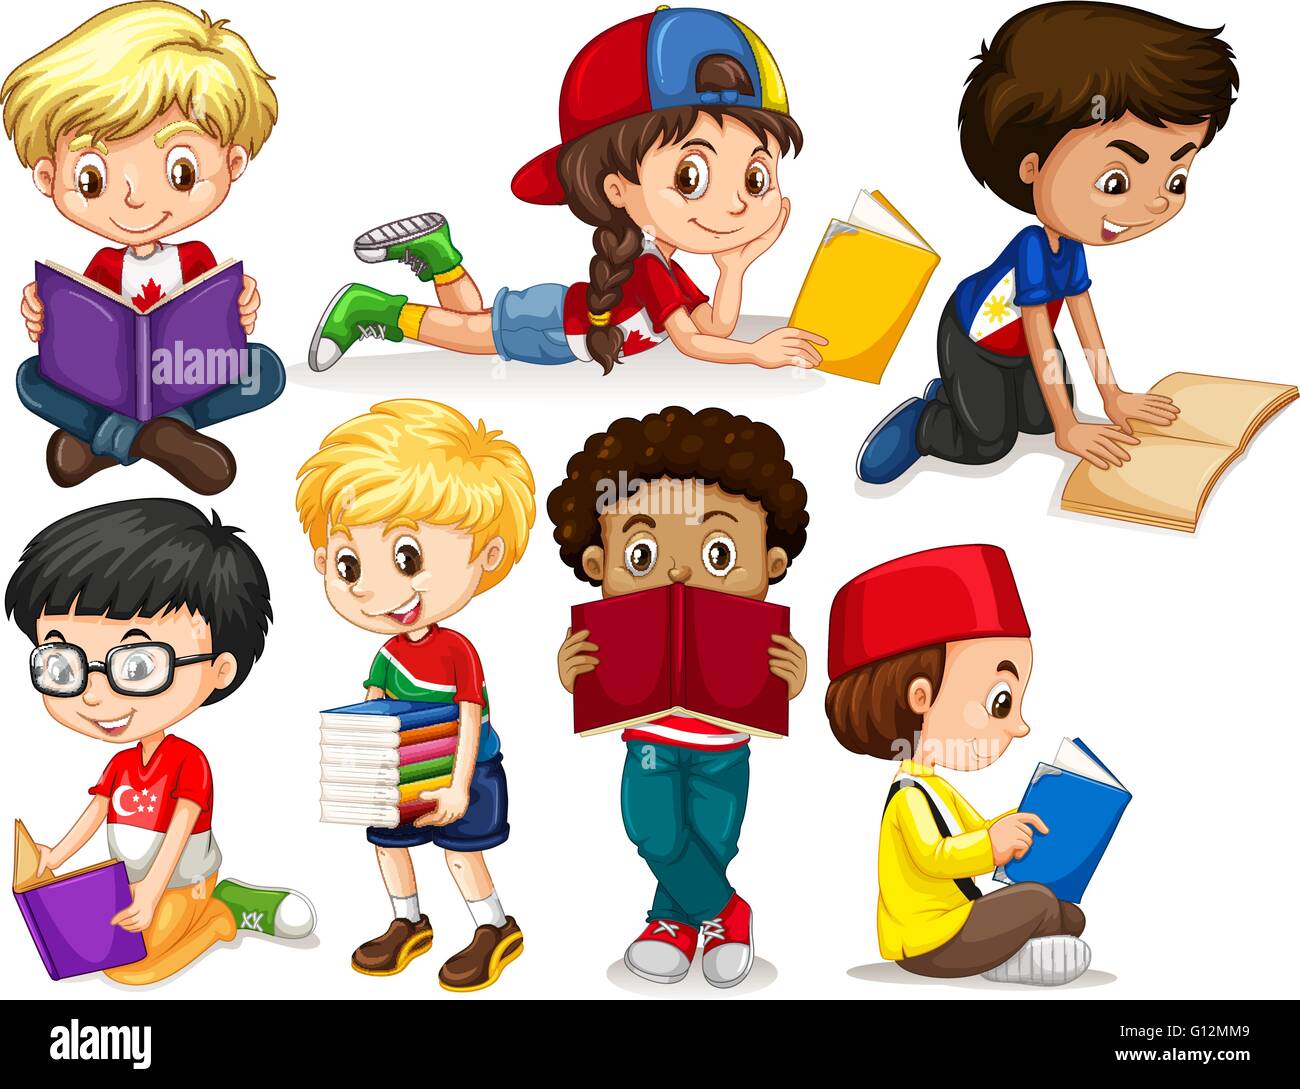 boy and girl reading clipart